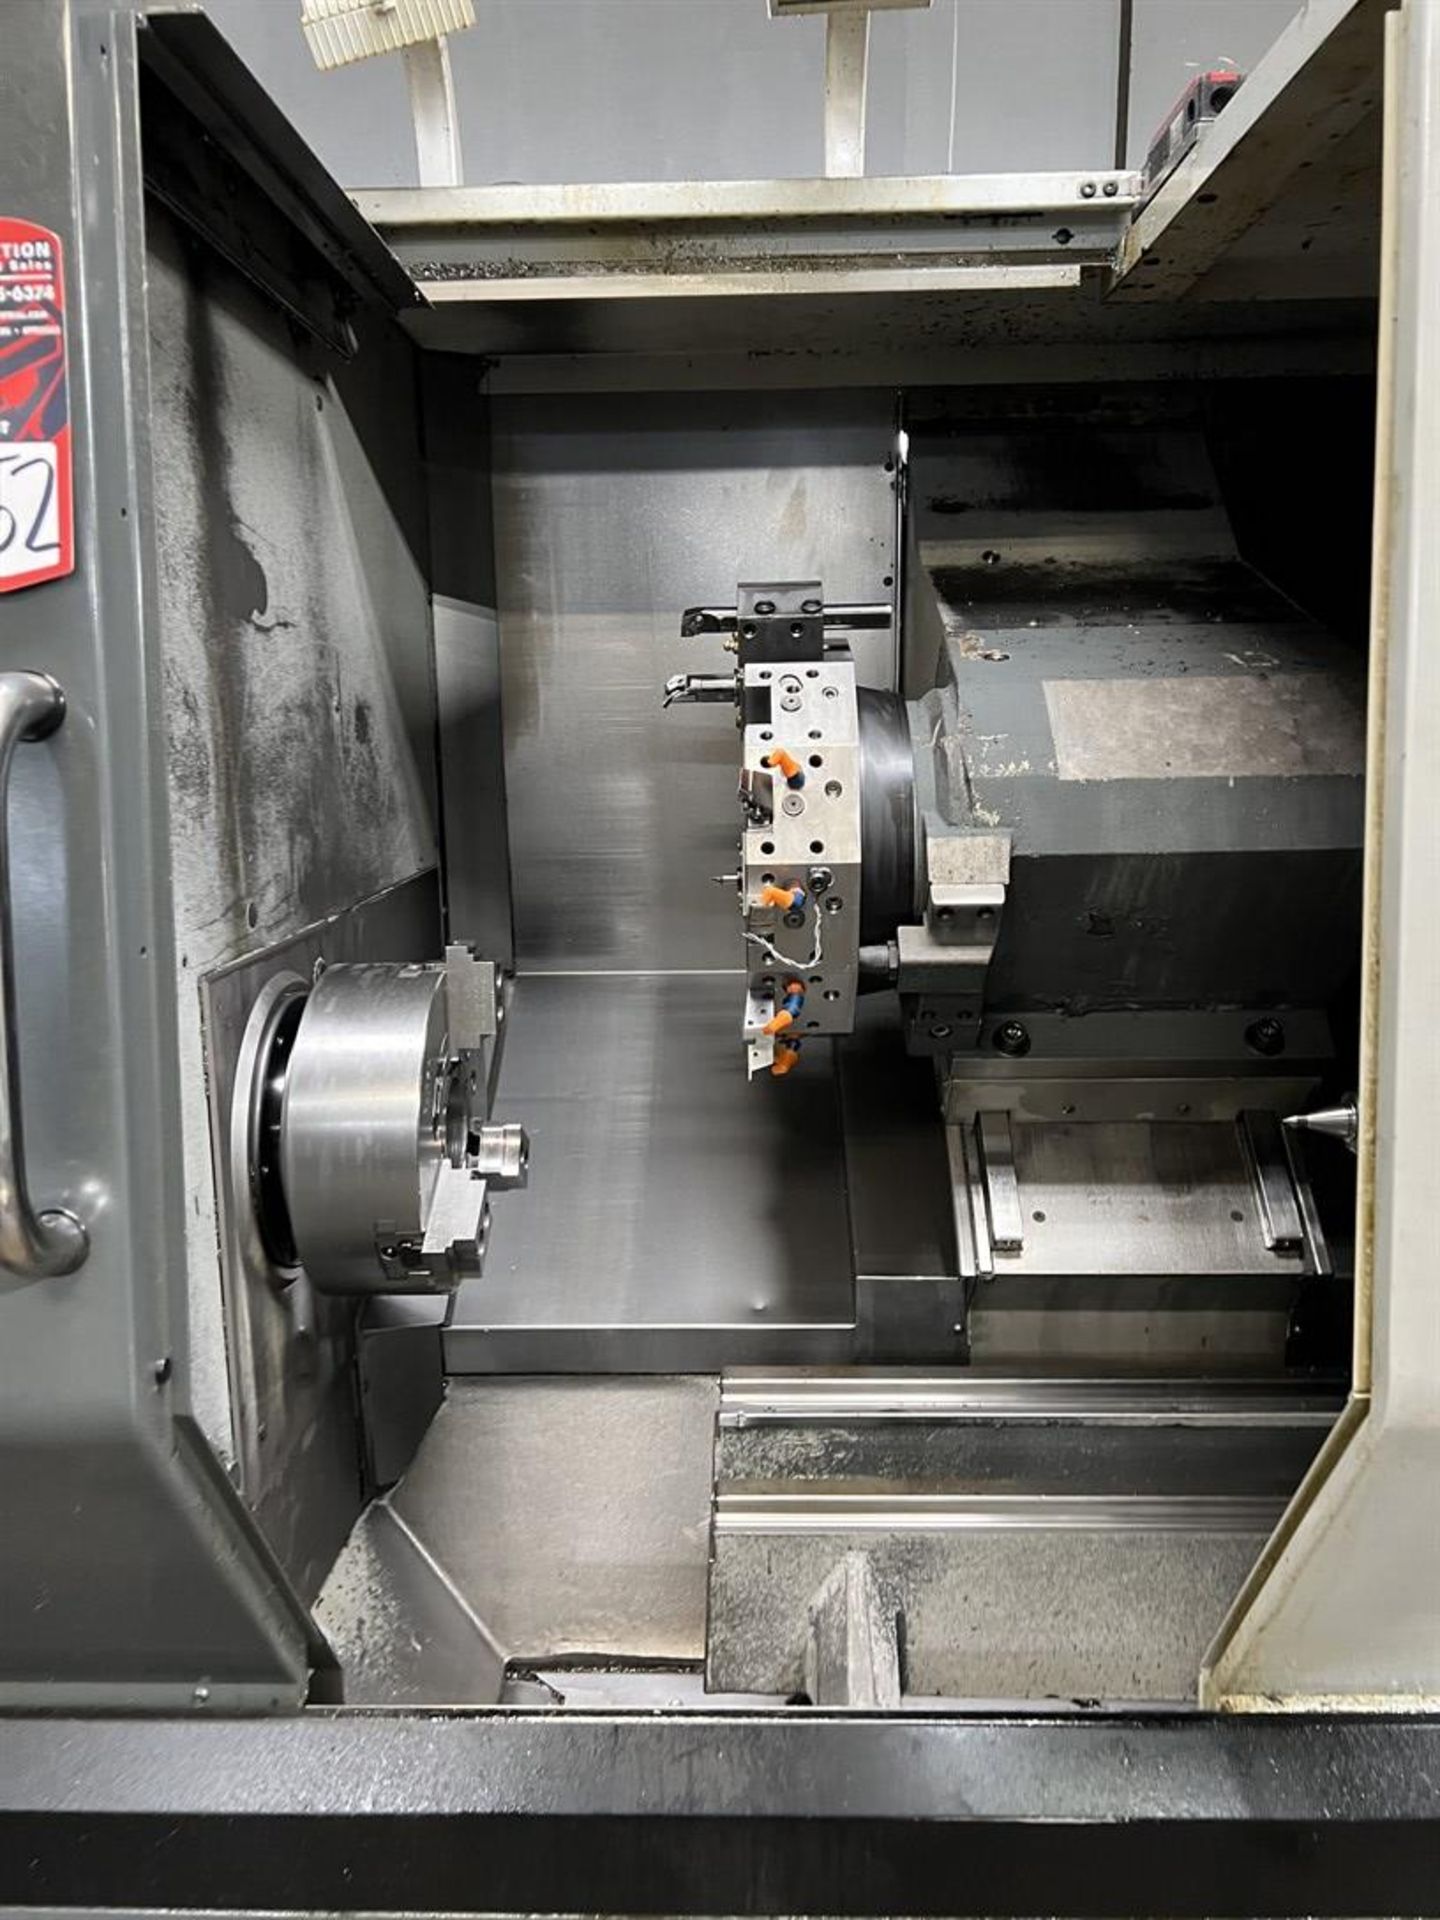 2013 HAAS ST-30 Turning Center, s/n 3095356, HAAS CNC Control, 12” 3-Jaw Chuck, 12-Position - Image 3 of 11